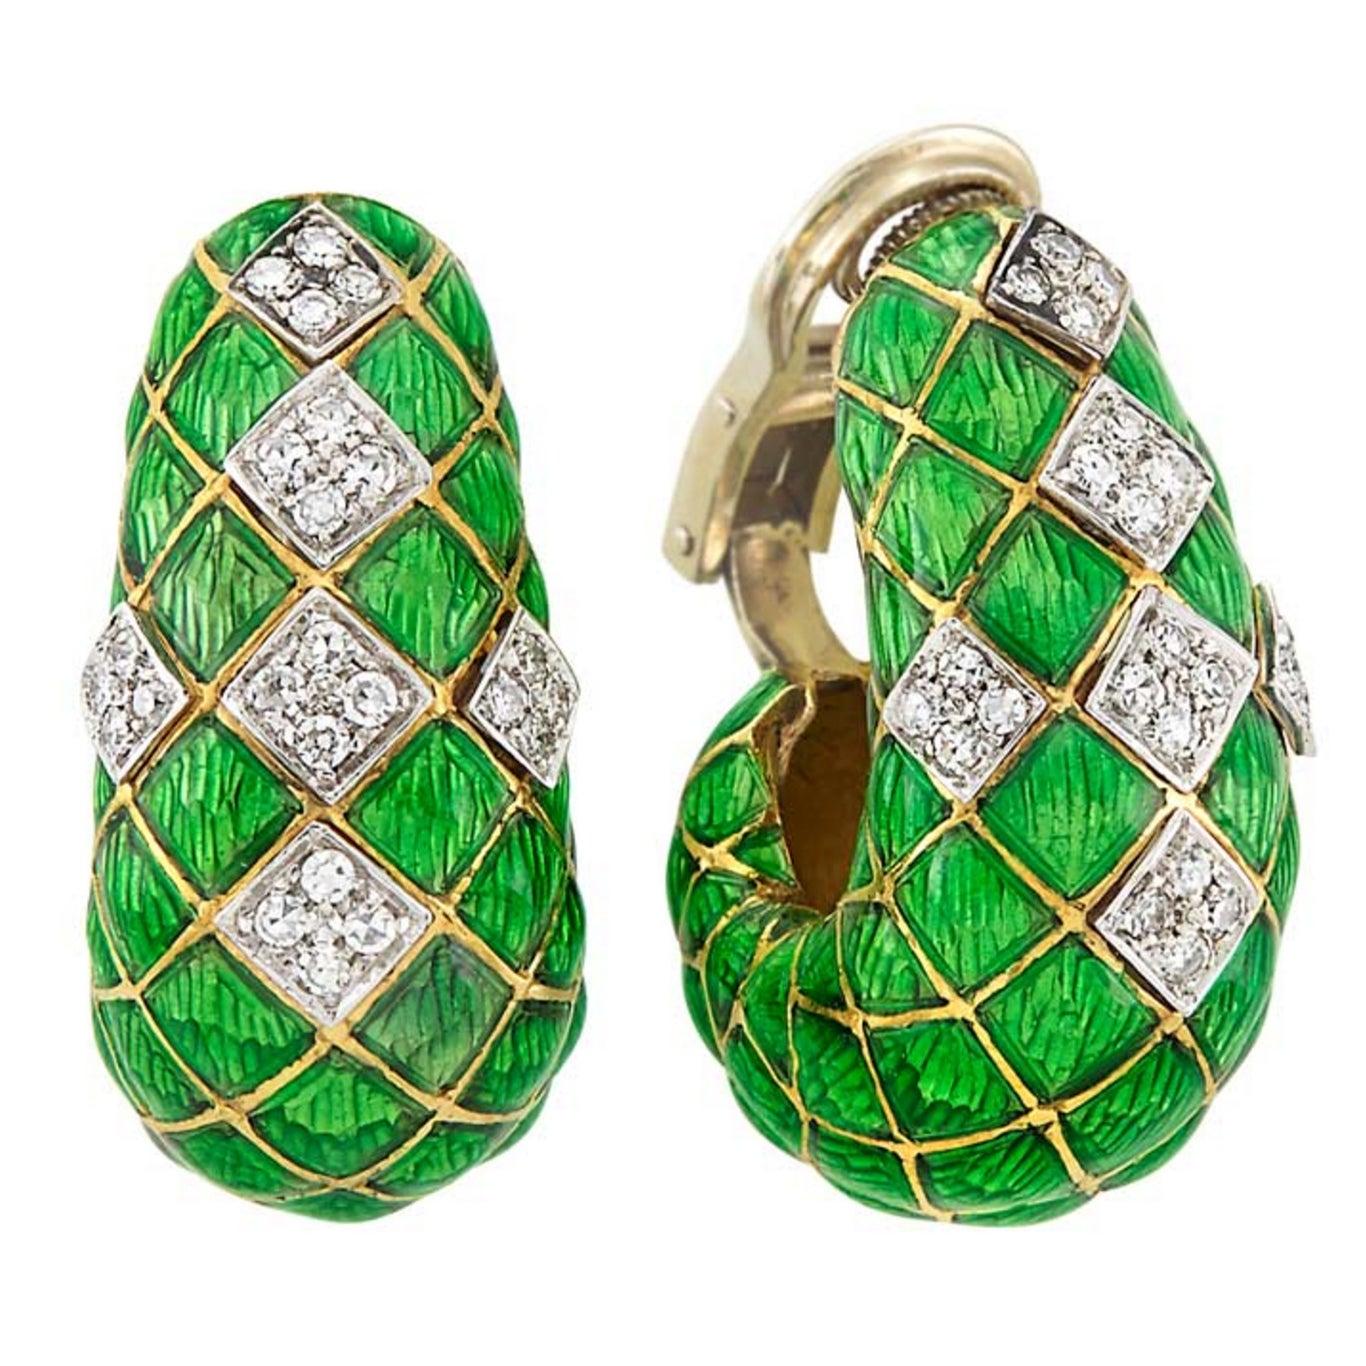 Green Enamel Diamond Gold Hoop Ear Clips In Excellent Condition For Sale In New York, NY